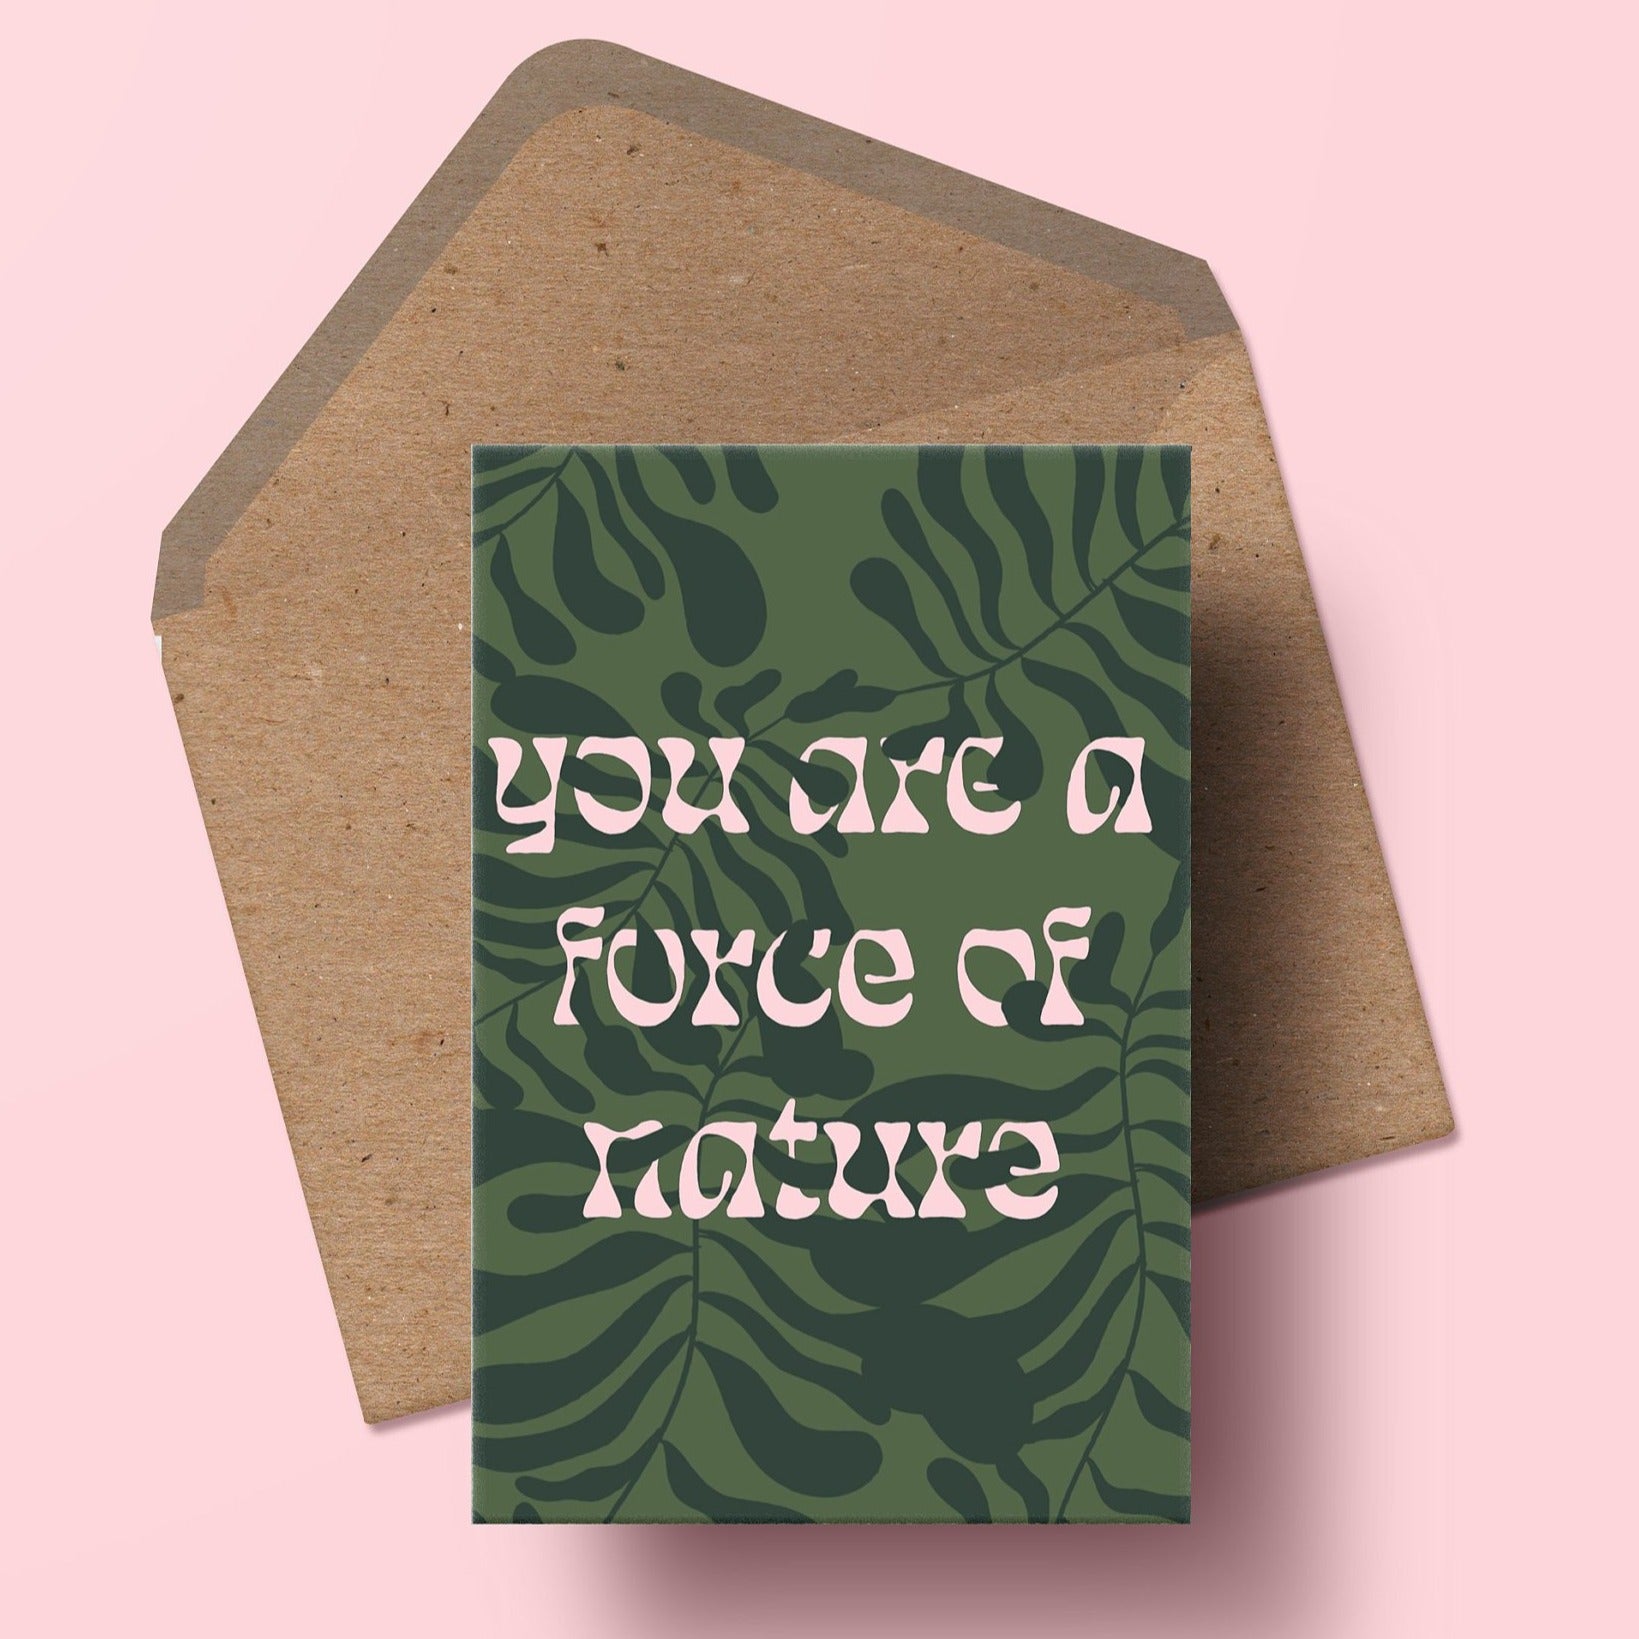 image of a greetings card featuring the words you are a force of nature in pale pink. the background is a medium green with a pattern of dark green overlapping leaves. the card is sat on top of a kraft envelope.